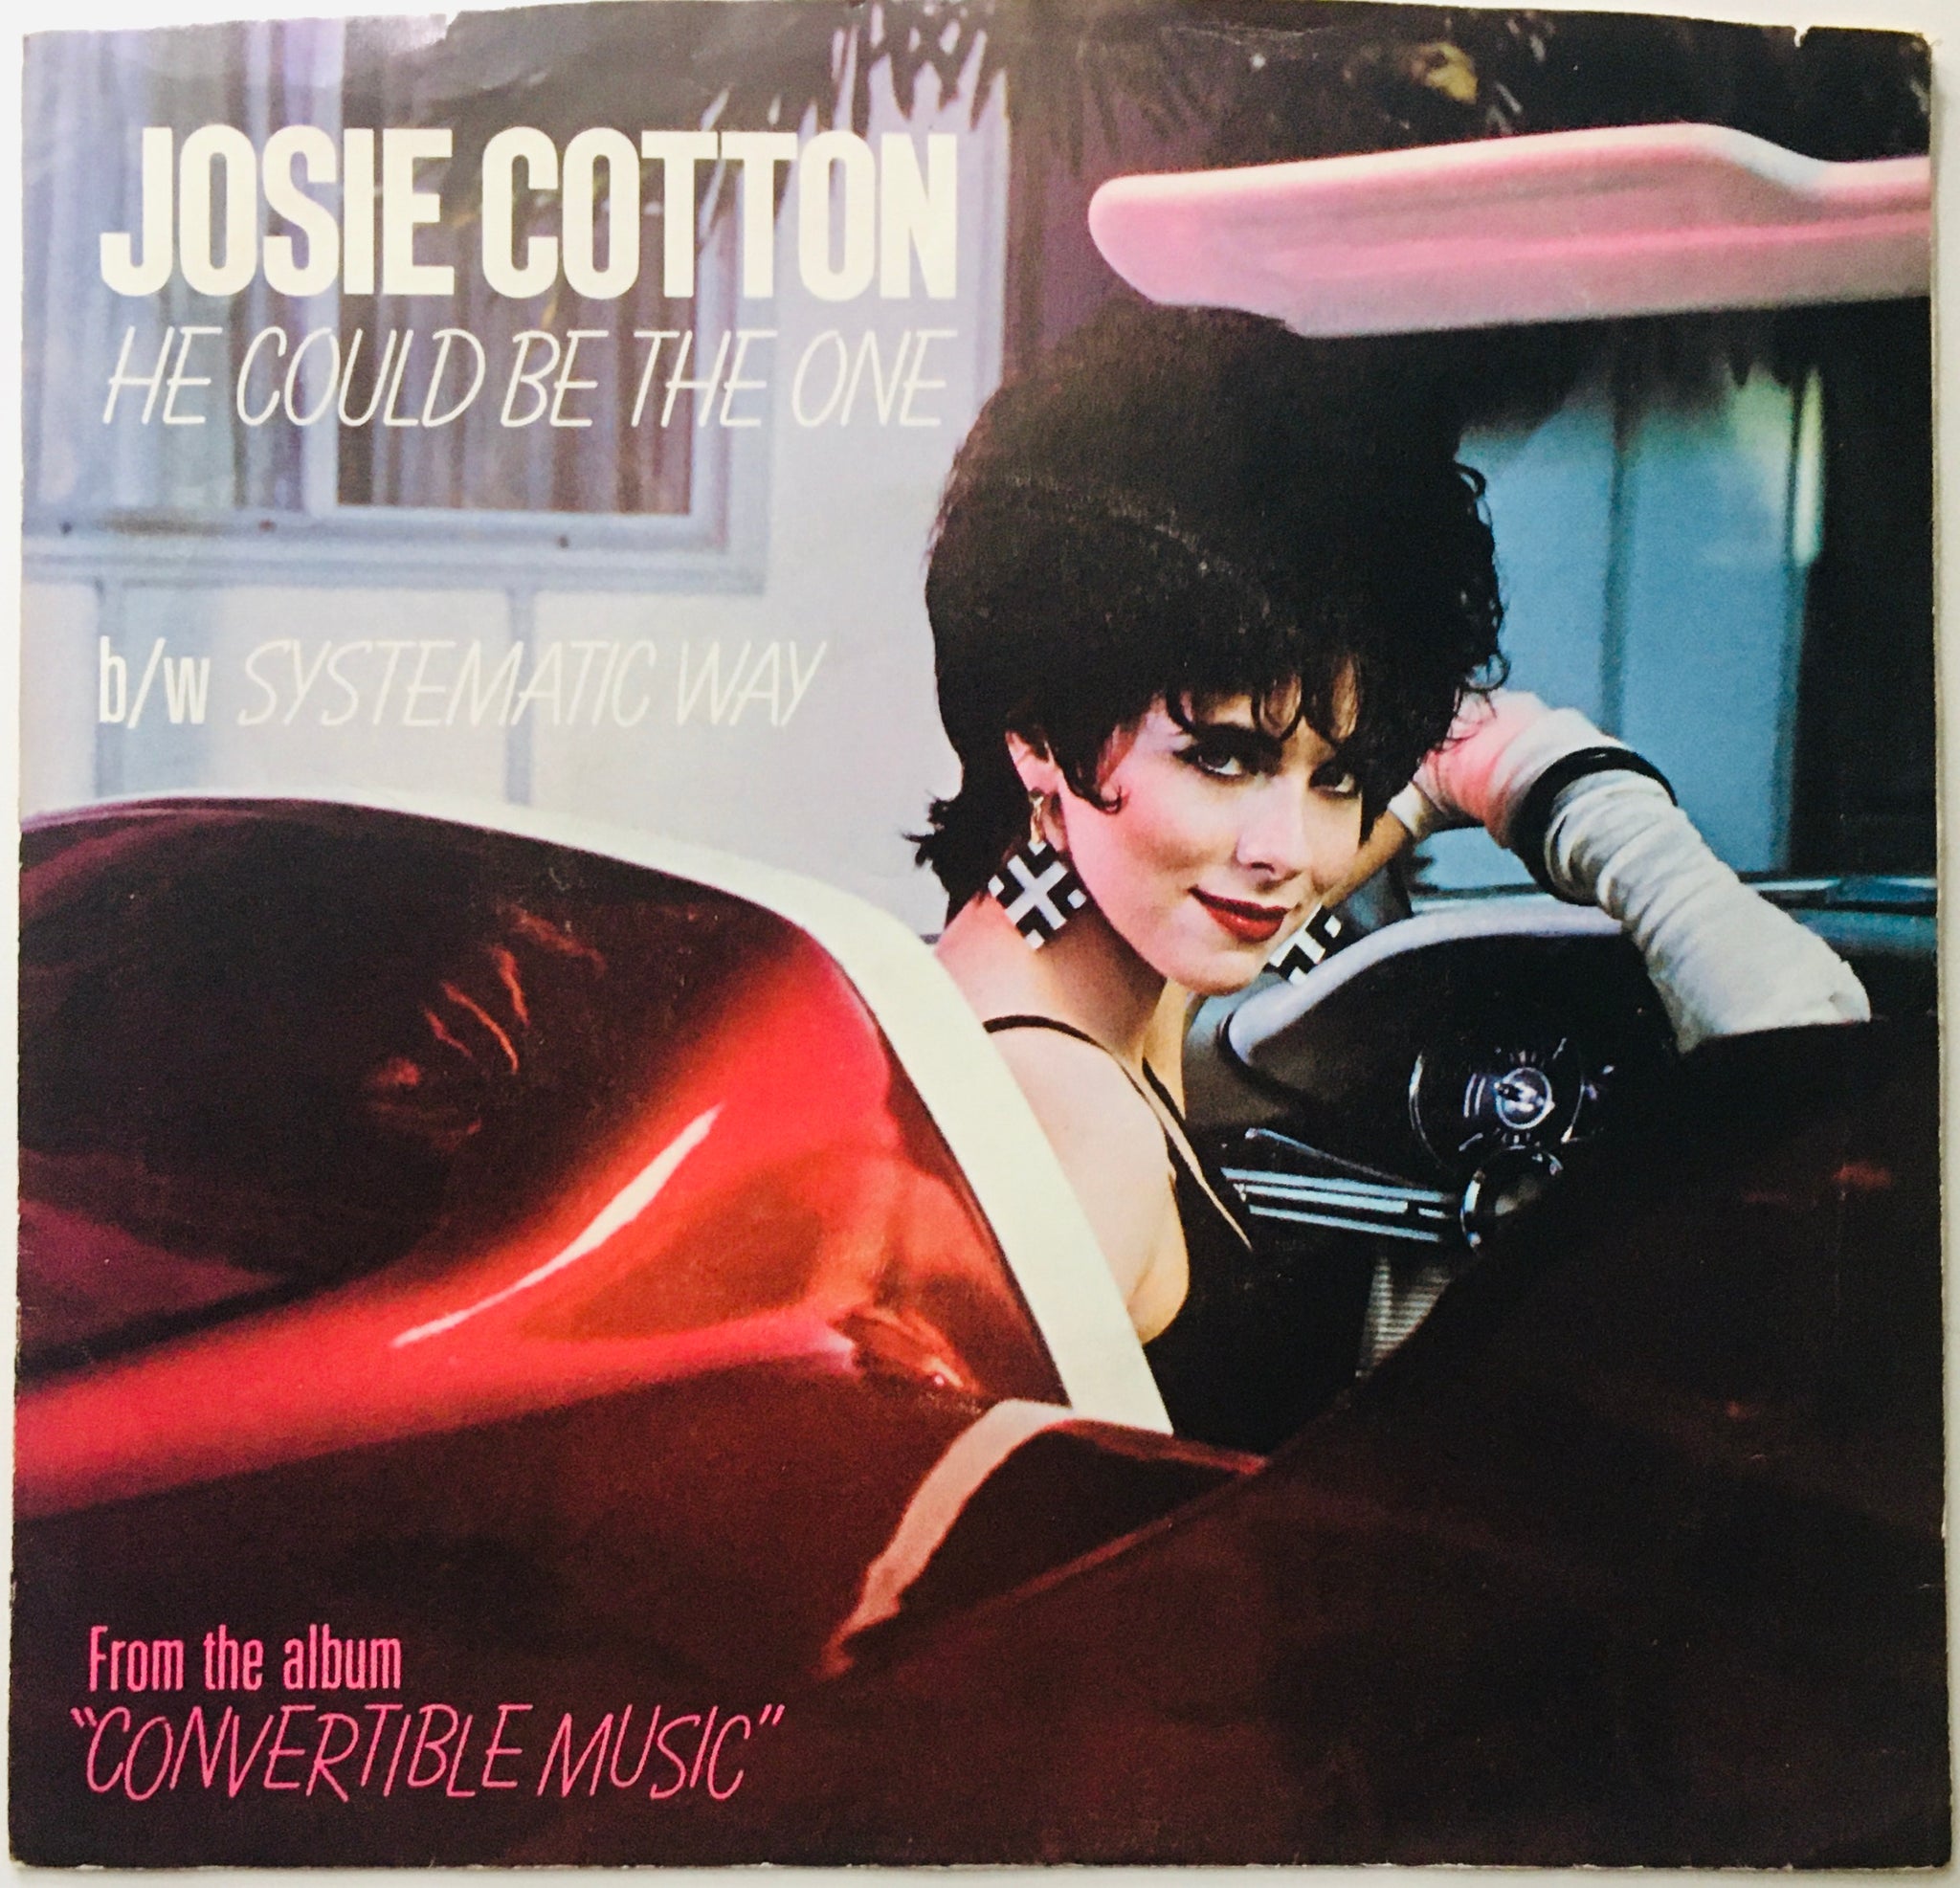 Josie Cotton "He Could Be The One" Single (1982)